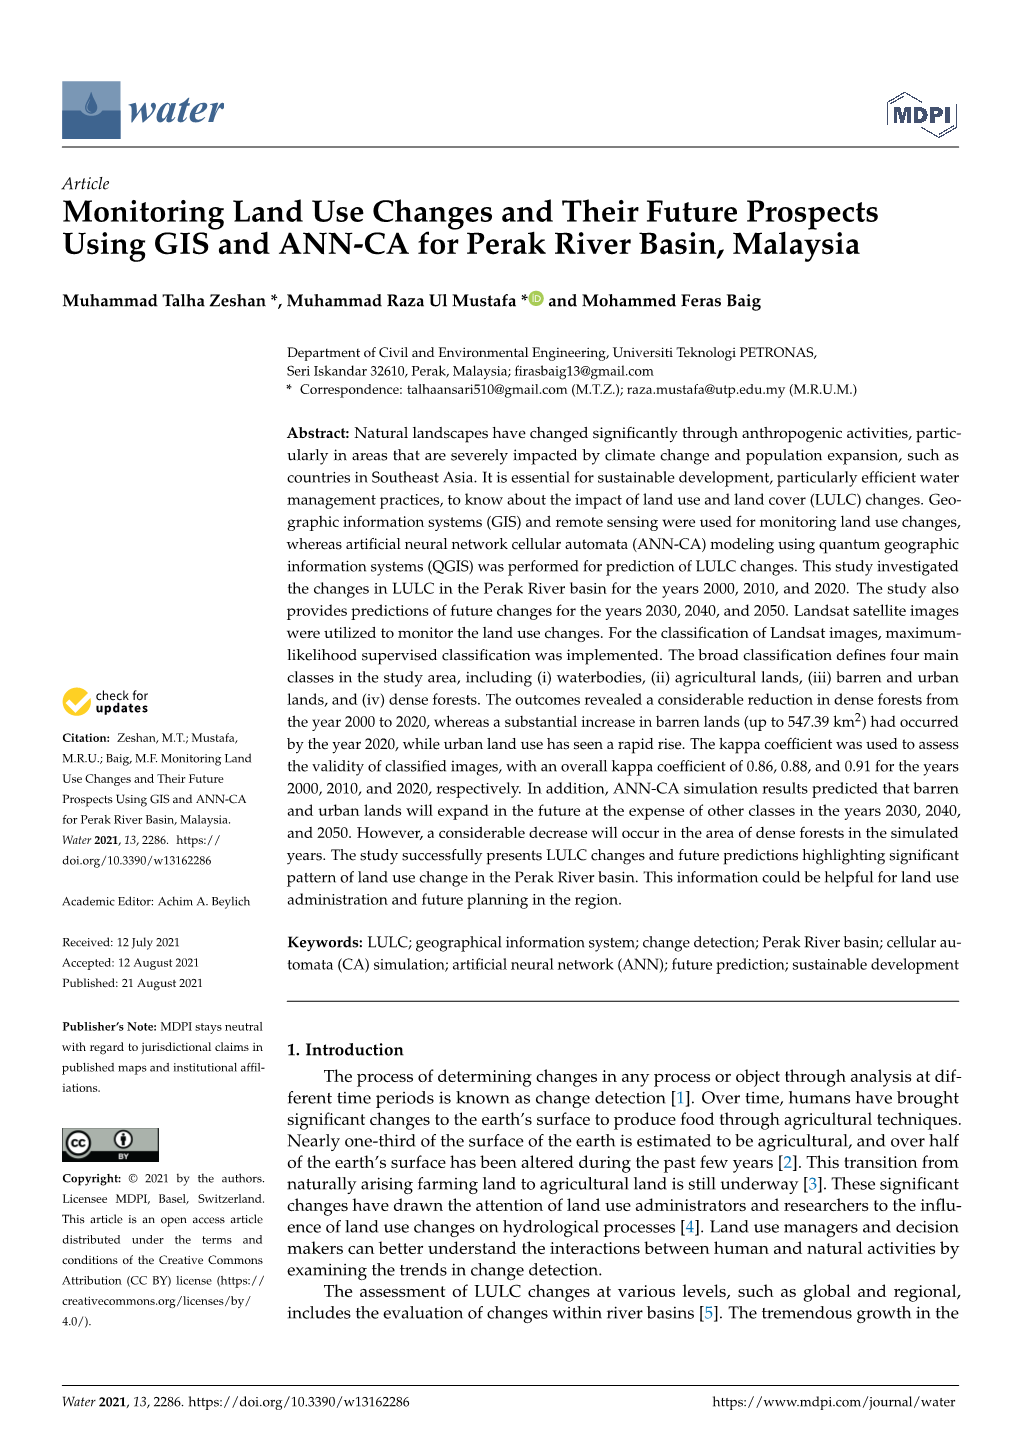 Monitoring Land Use Changes and Their Future Prospects Using GIS and ANN-CA for Perak River Basin, Malaysia